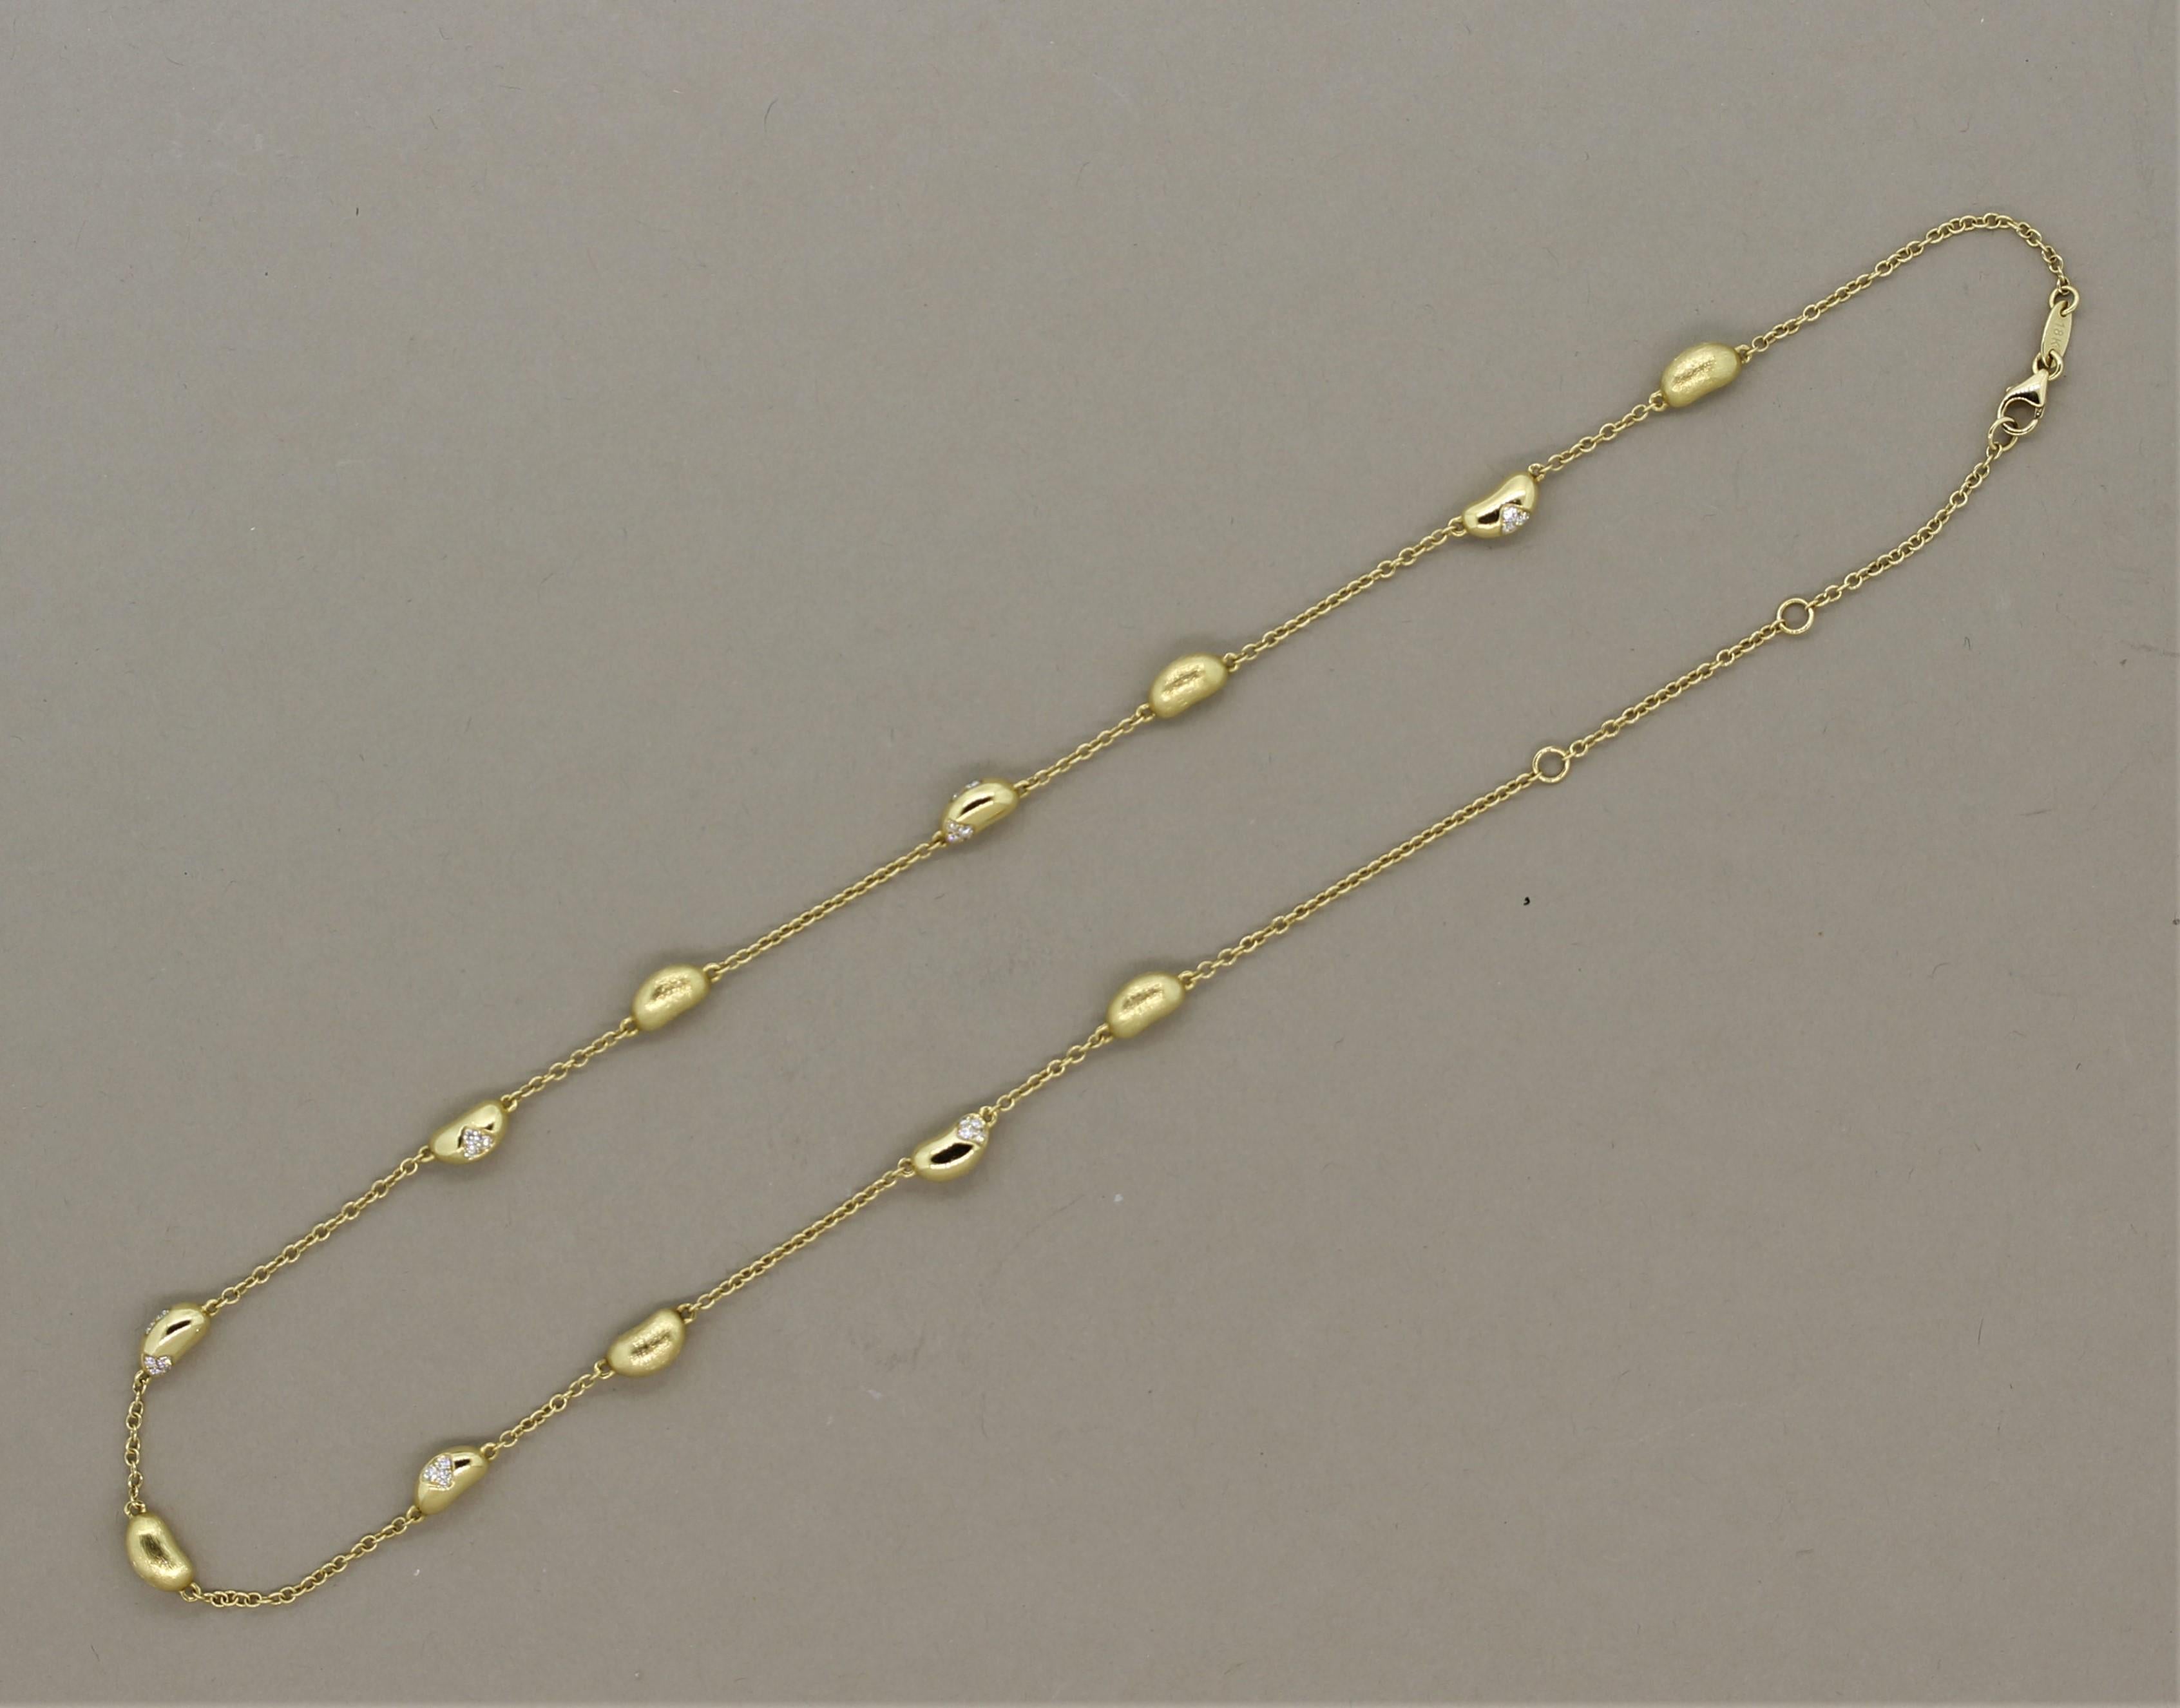 A simple yet stylish necklace made in the diamond by the yard style! It features golden nuggets of 18k yellow gold set across the chain. Every other nugget is set with round brilliant cut diamonds totaling 0.33 carats. The nuggets without diamonds